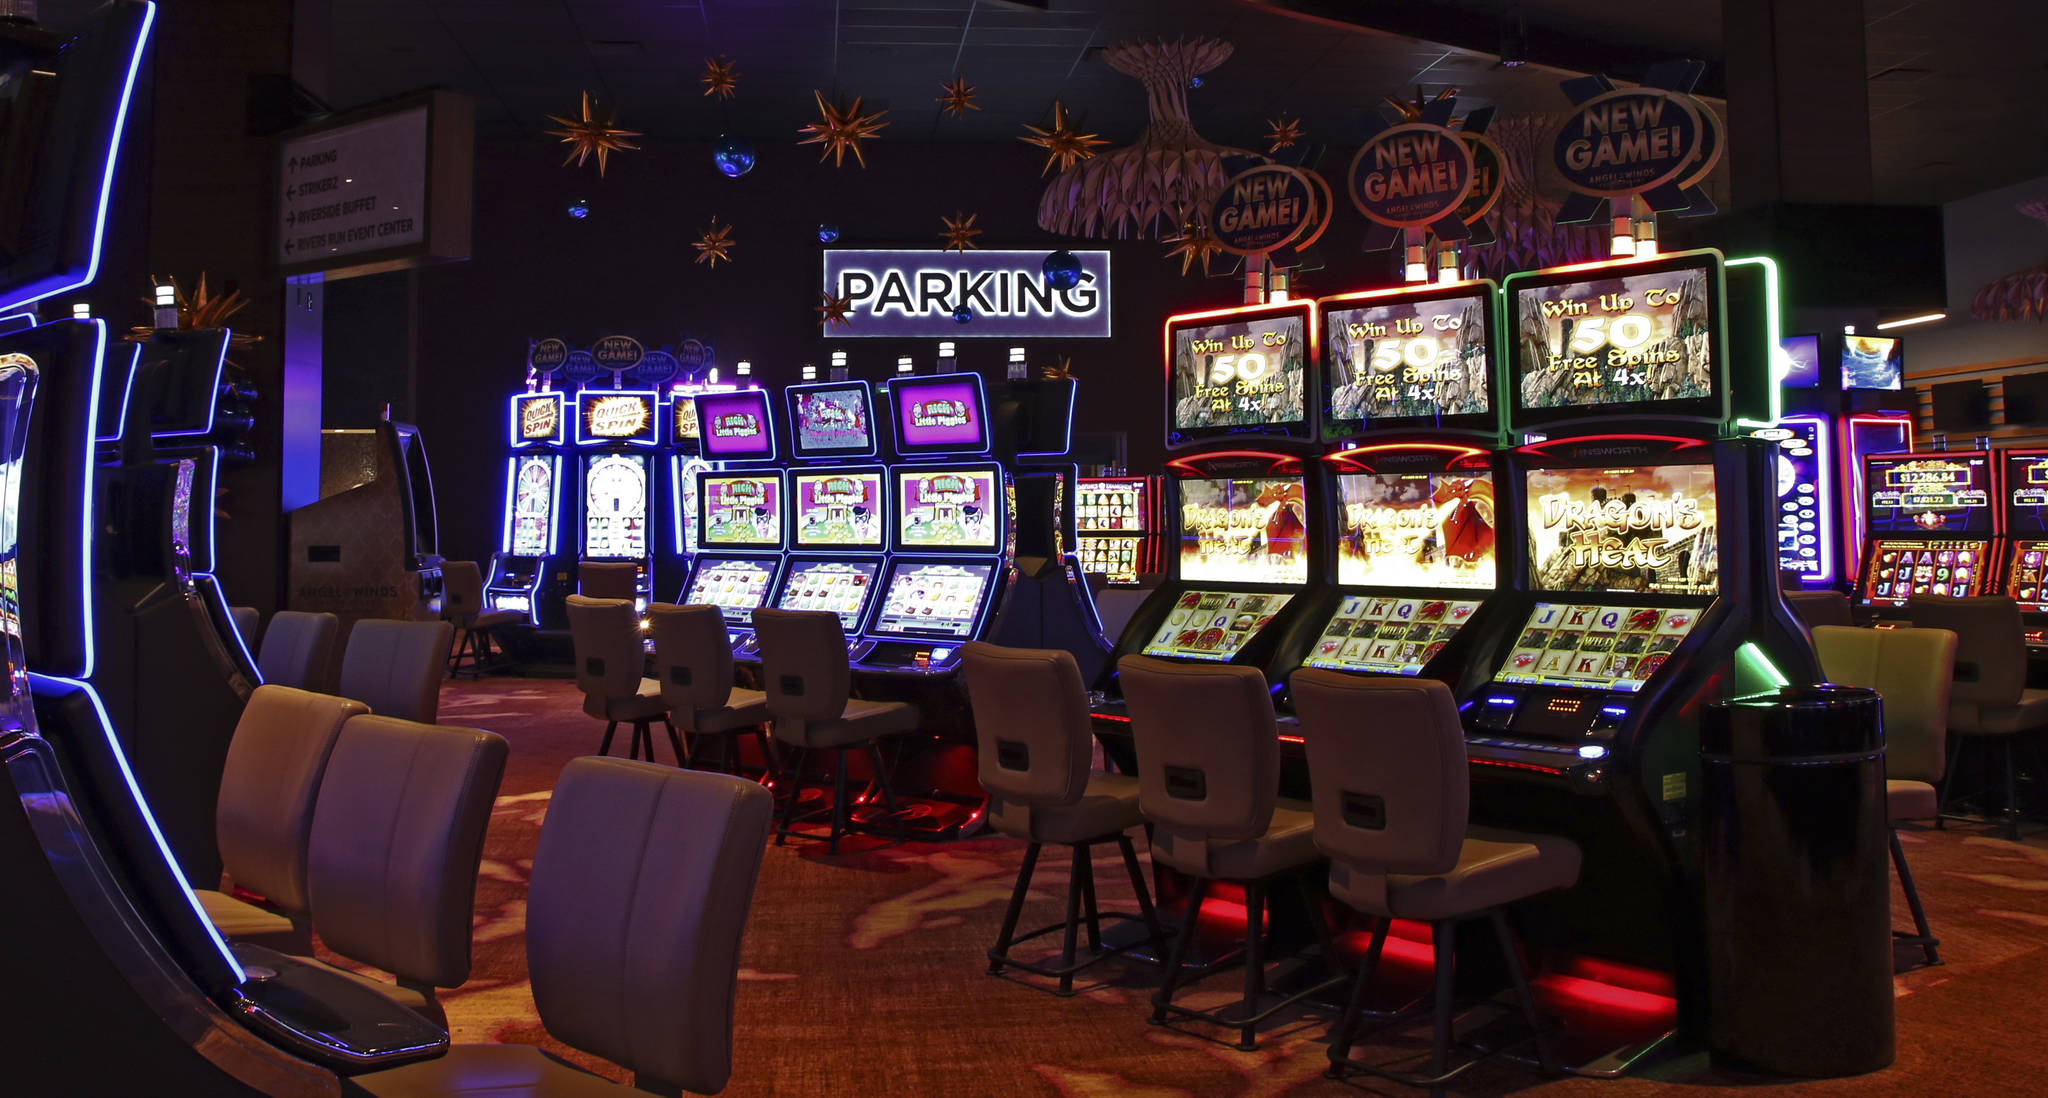 The new expanded gaming area officially opened Thursday.